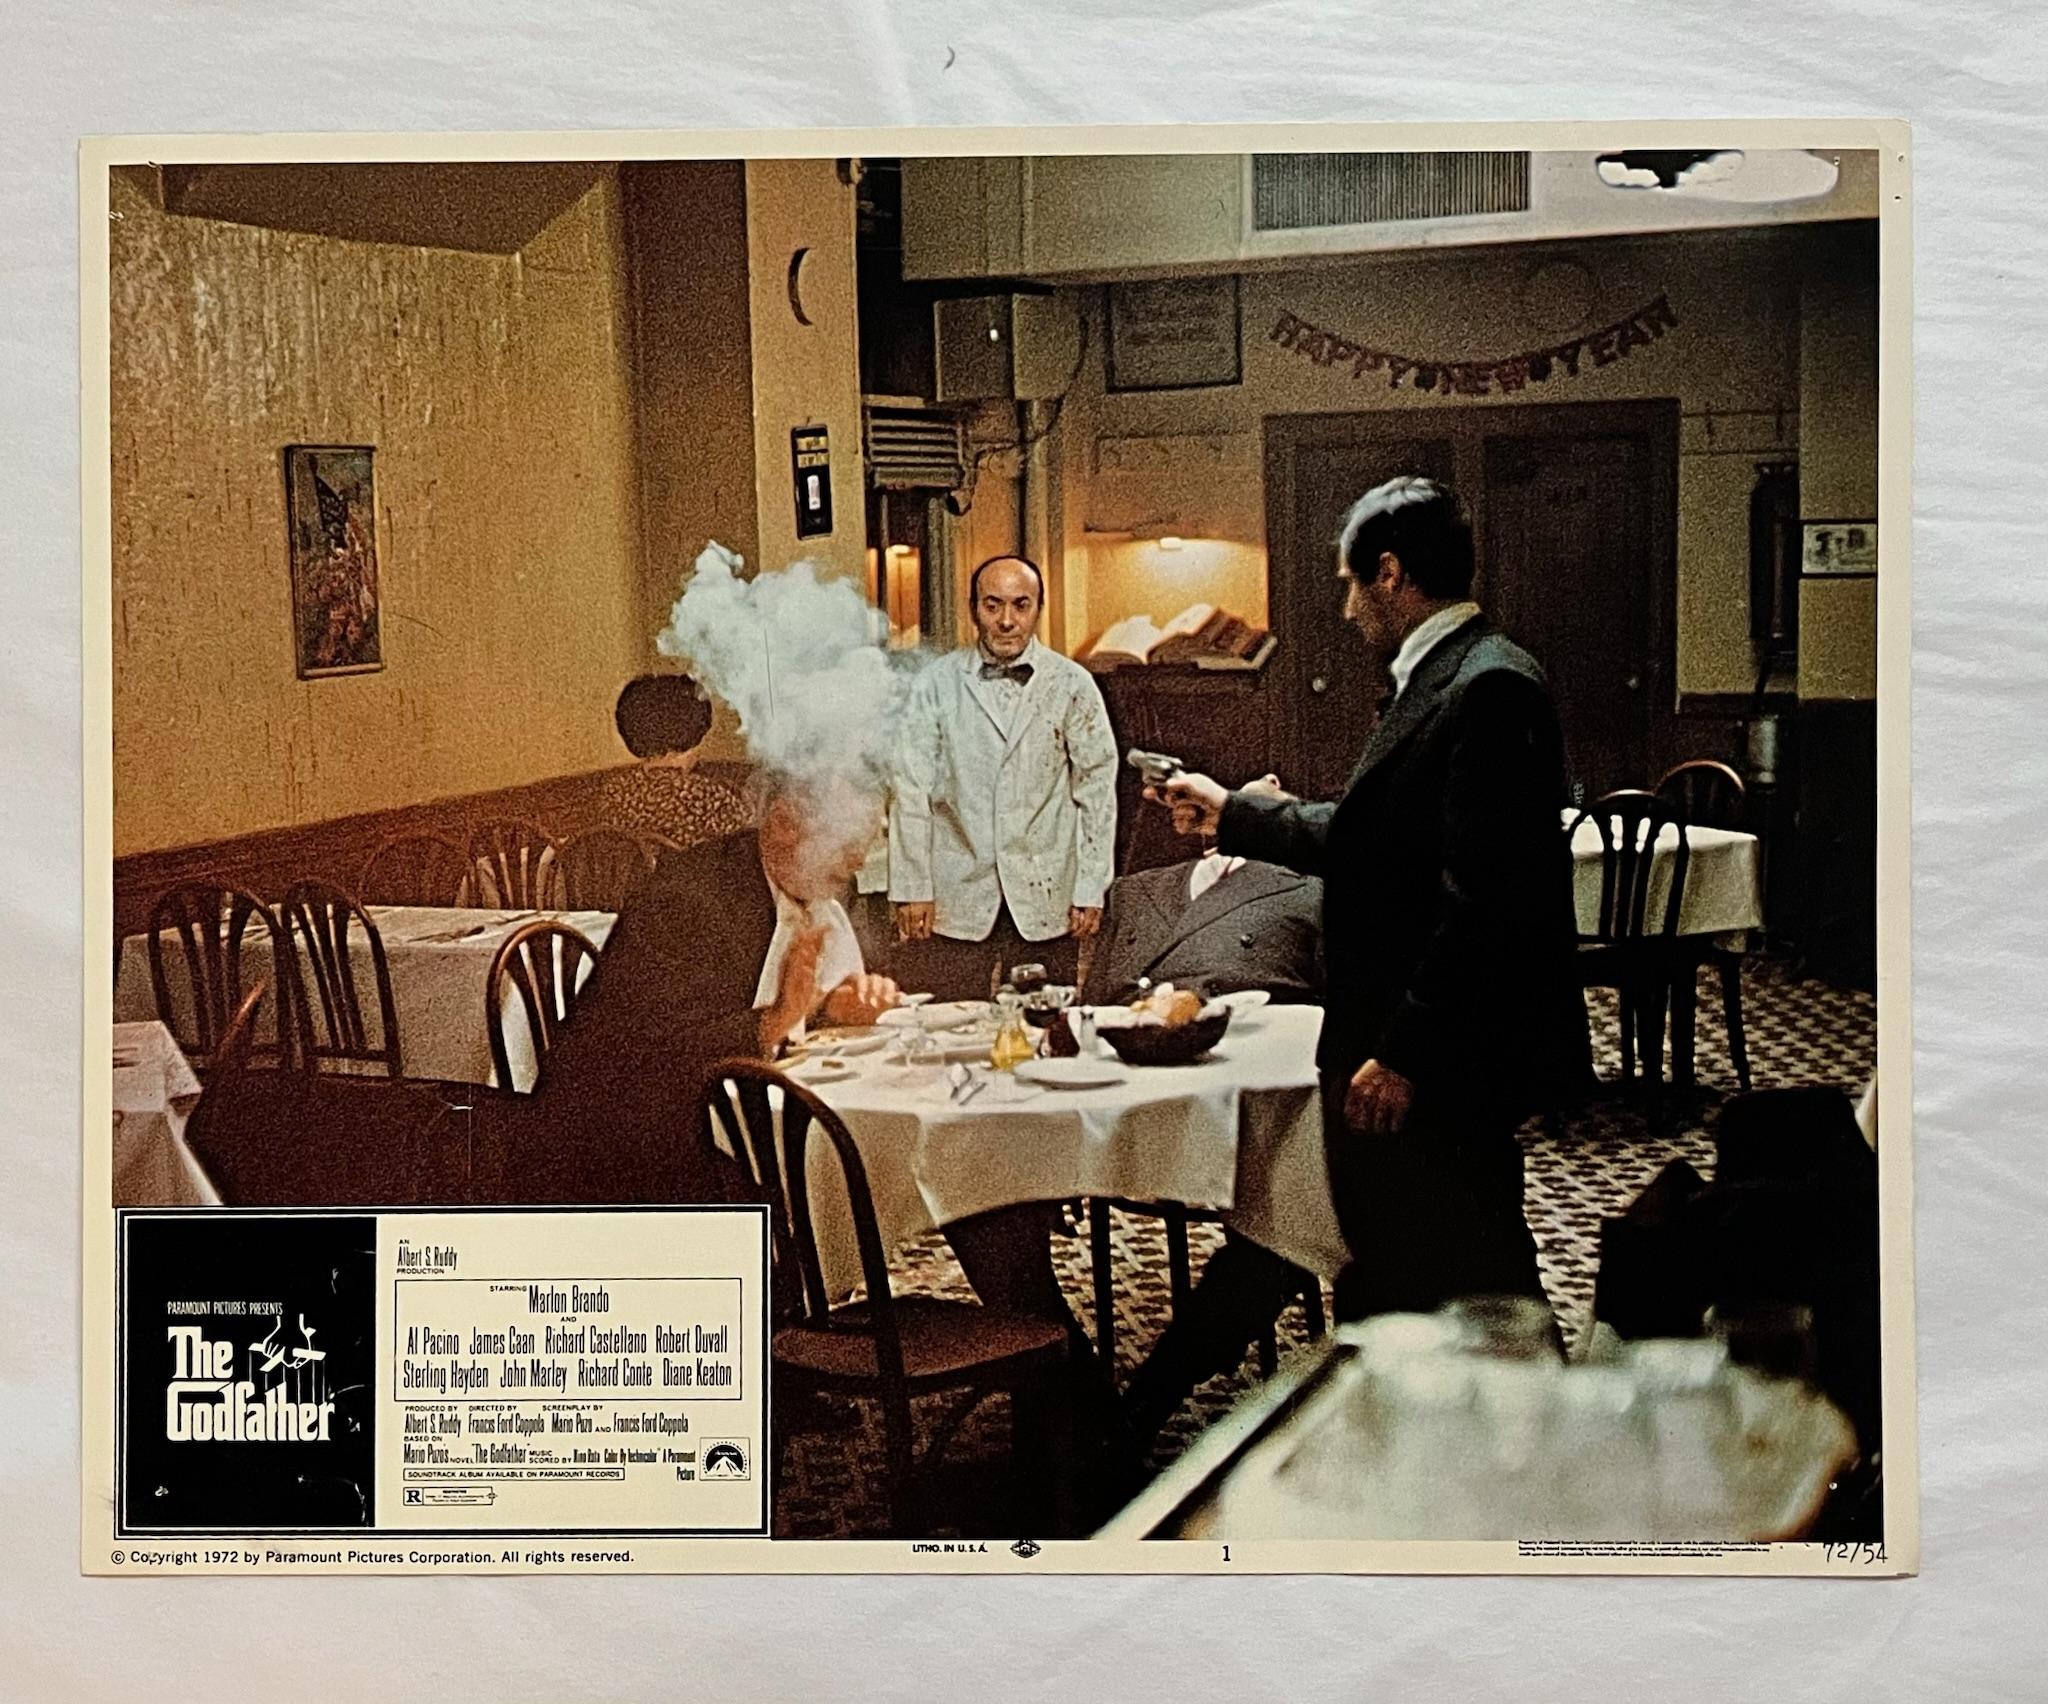 The Godfather - Original 1972 Lobby Card #1

Vintage Godfather Lobby Card: 
The aging patriarch of an organized crime dynasty transfers control of his clandestine empire to his reluctant son.

Director: Francis Ford Coppola
Writers: Mario Puzo